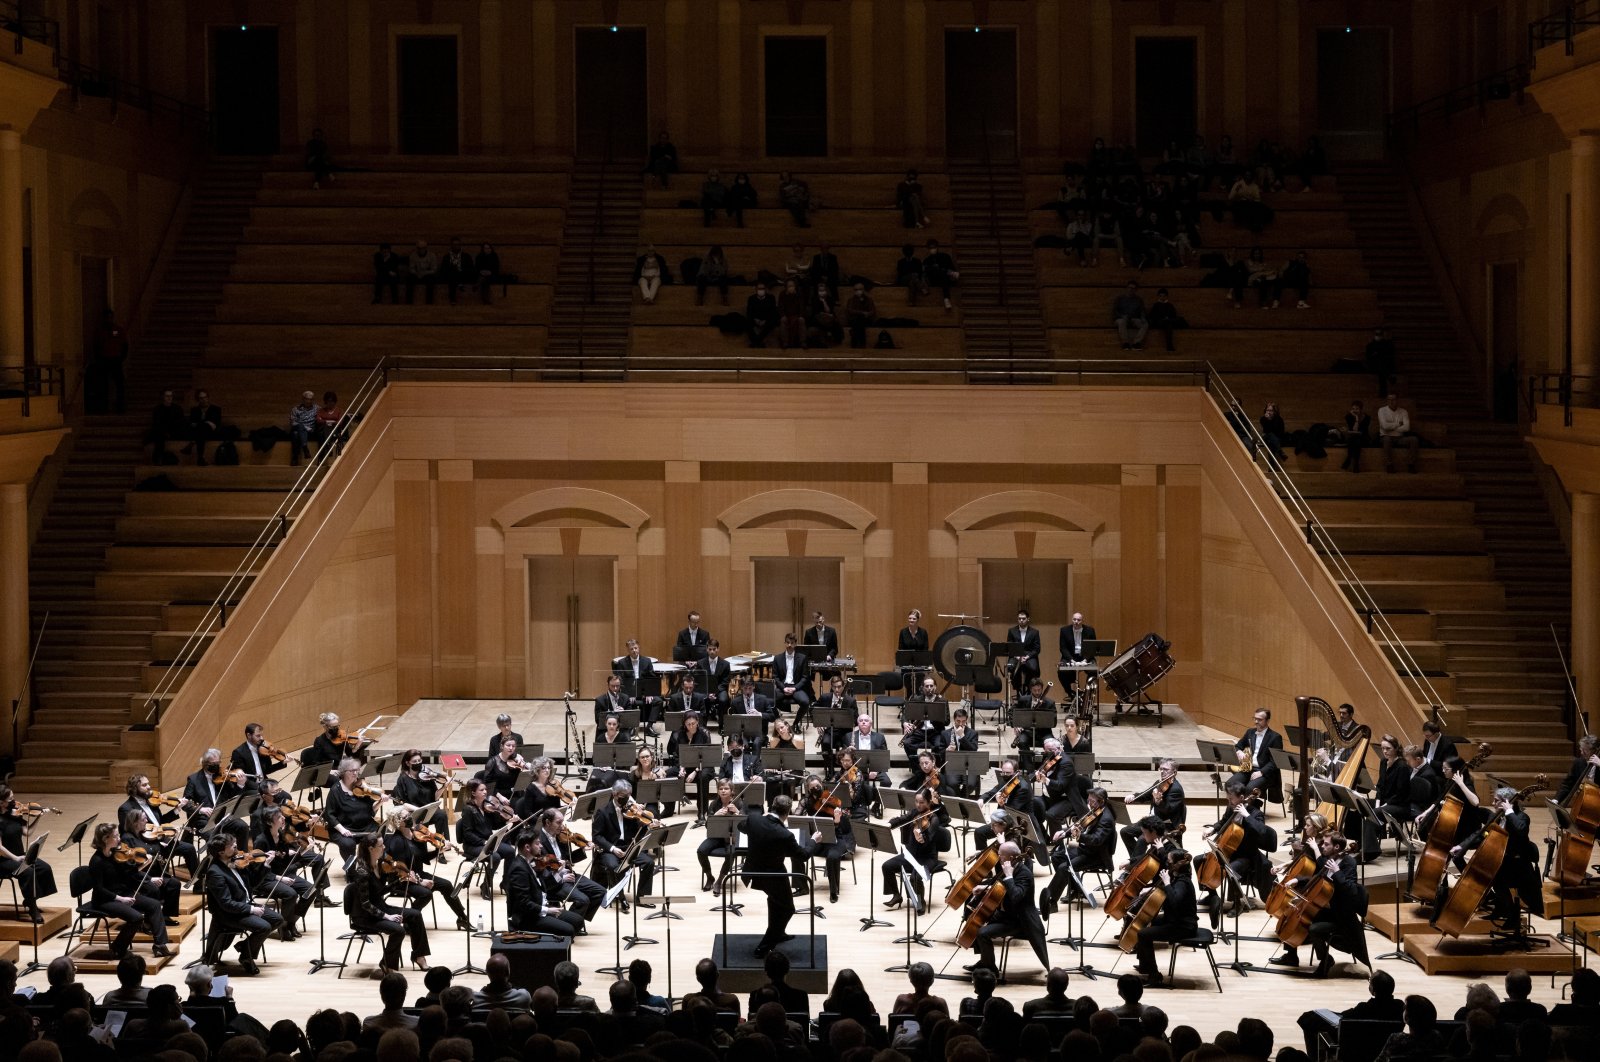 The French Metz Grand Est National Orchestra during a performance. (Photo courtesy of Institut français Türkiye)